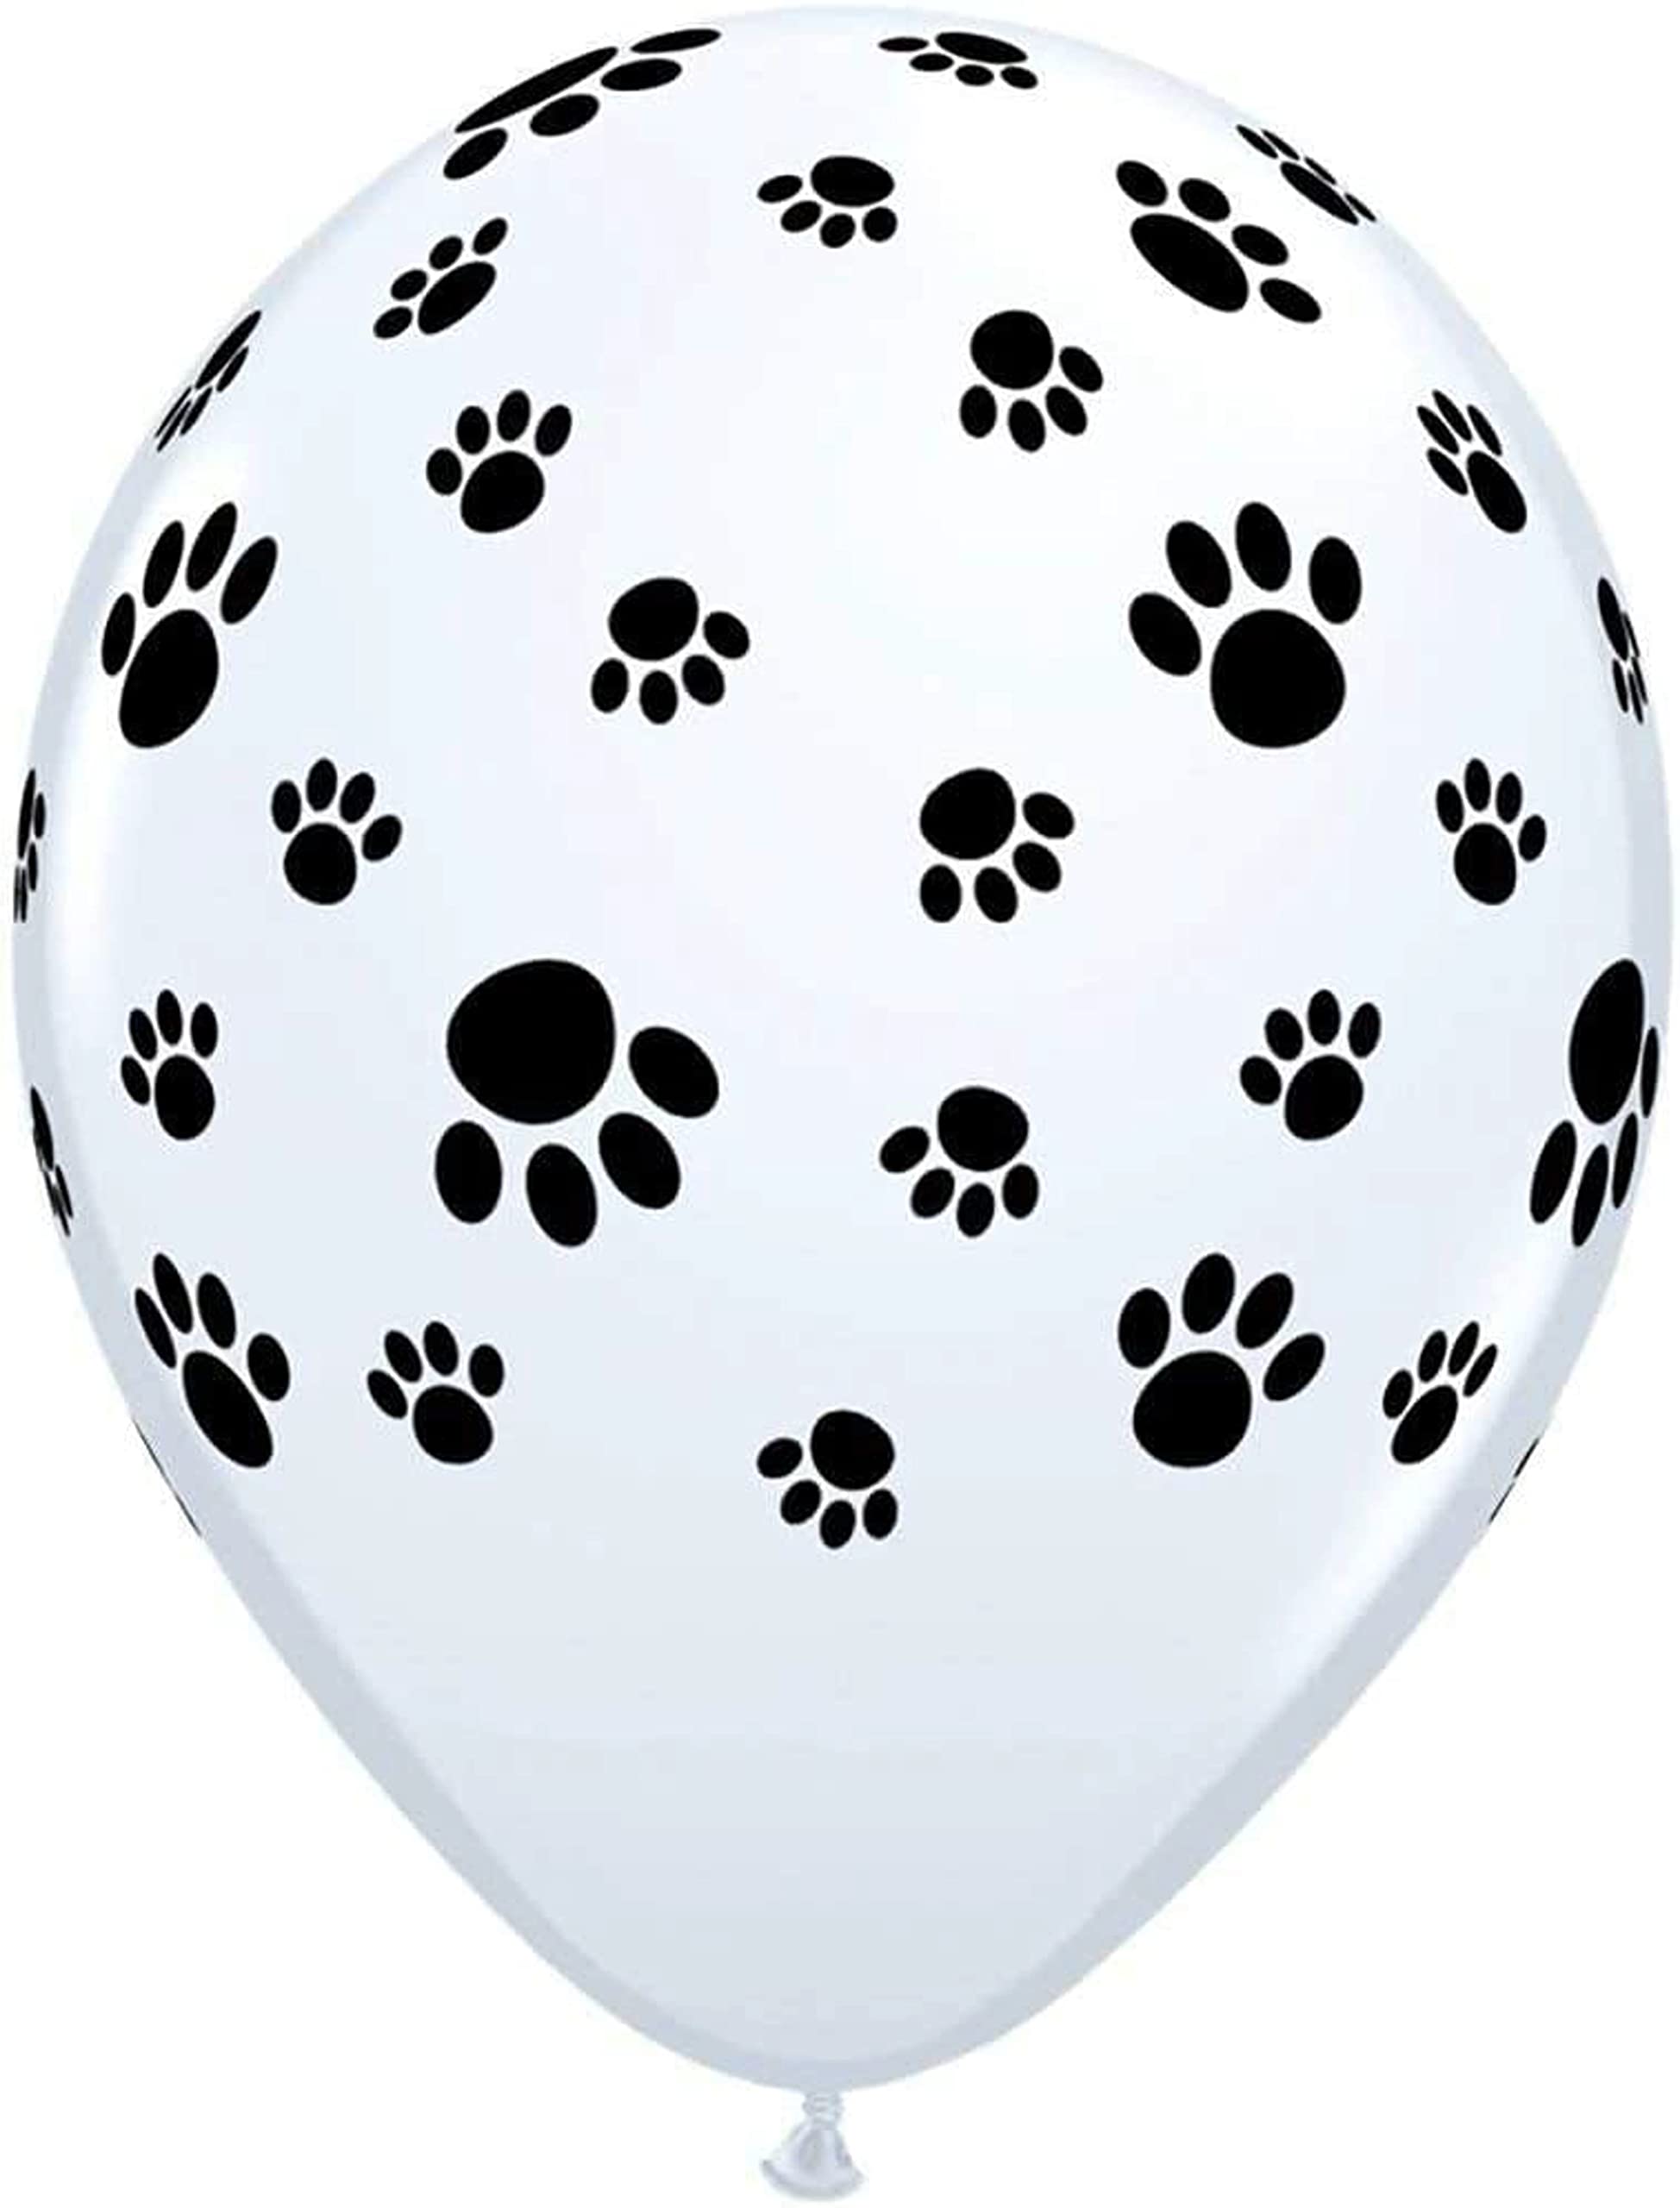 Paw Girl Pups on Patrol Skye 4th Birthday Party Supplies Balloon Bouquet Decorations